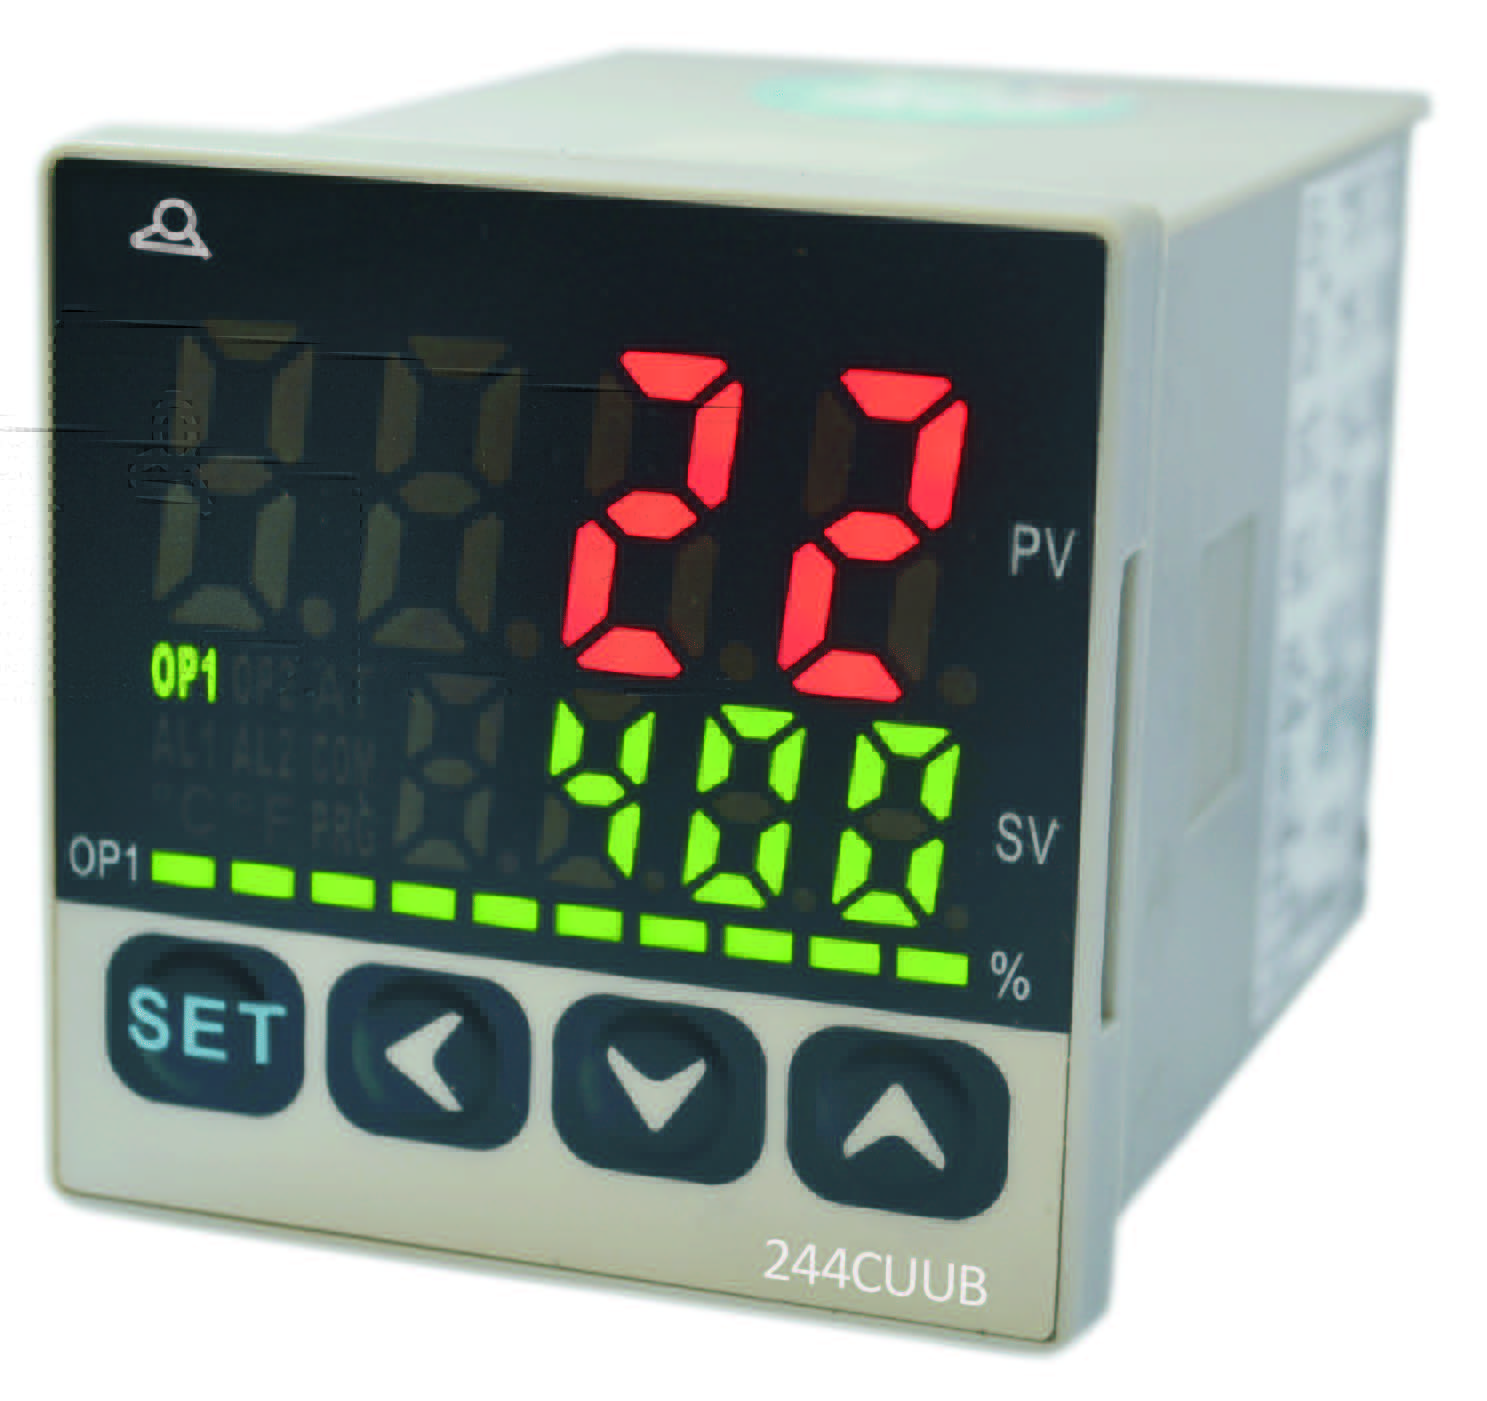 https://www.jpcfrance.eu/wp-content/uploads/2018/09/48-x-48-Intelligent-PID-Temperature-Controller-double-displaymultisensor-power-relay-and-SSR-outputs-1.jpg